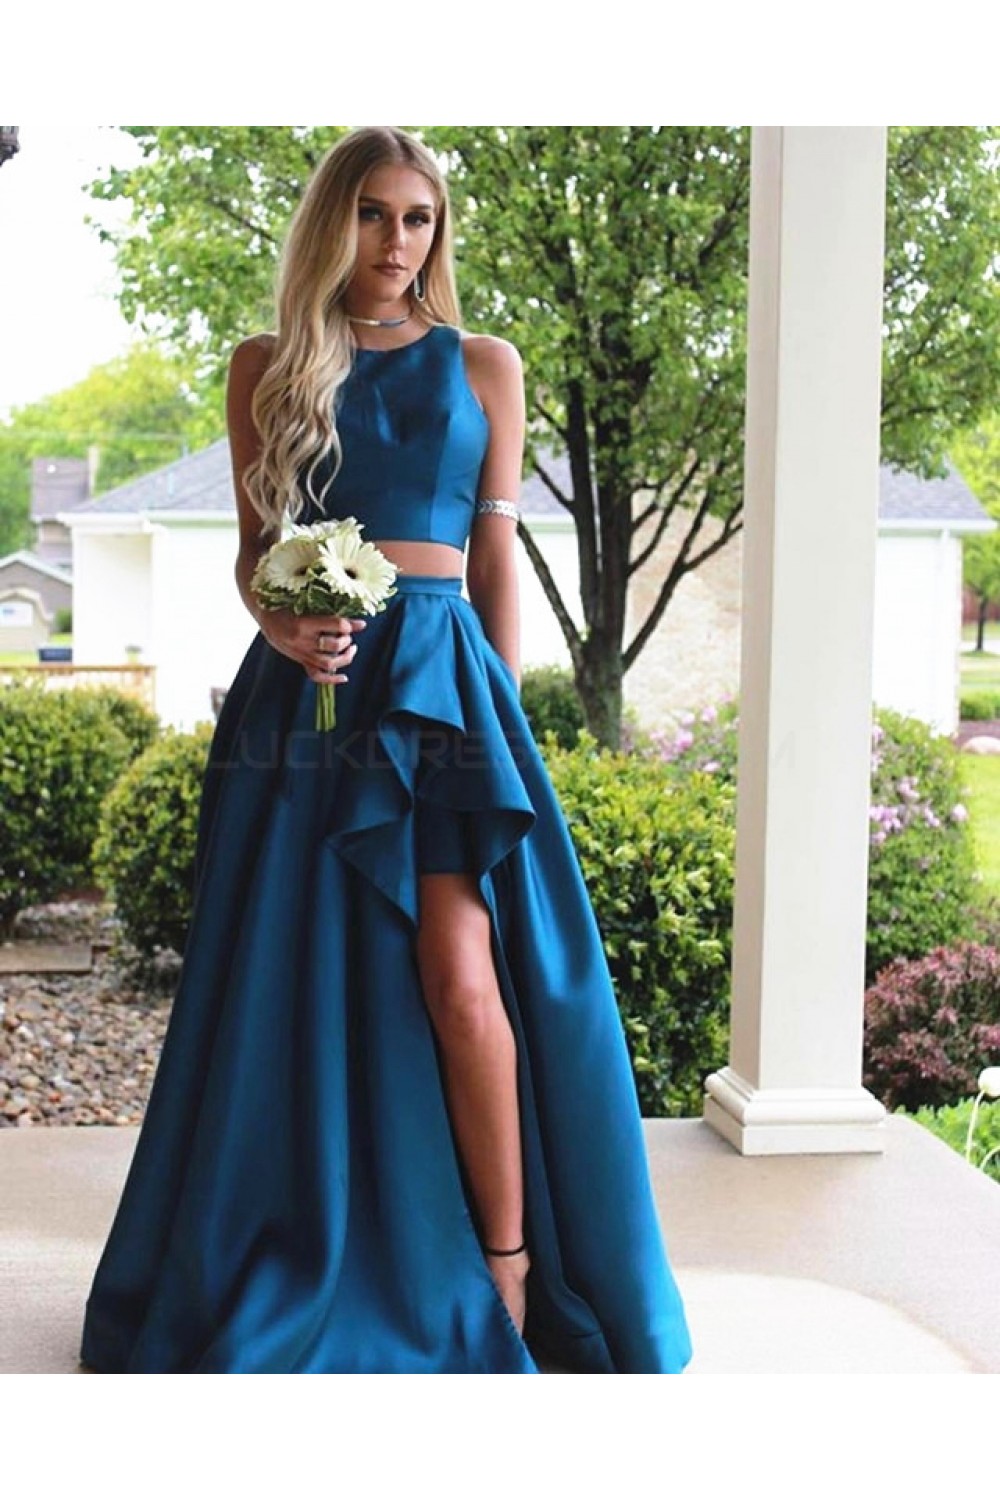 Satin Royal Blue Prom Formal Evening Party Dresses 3020980